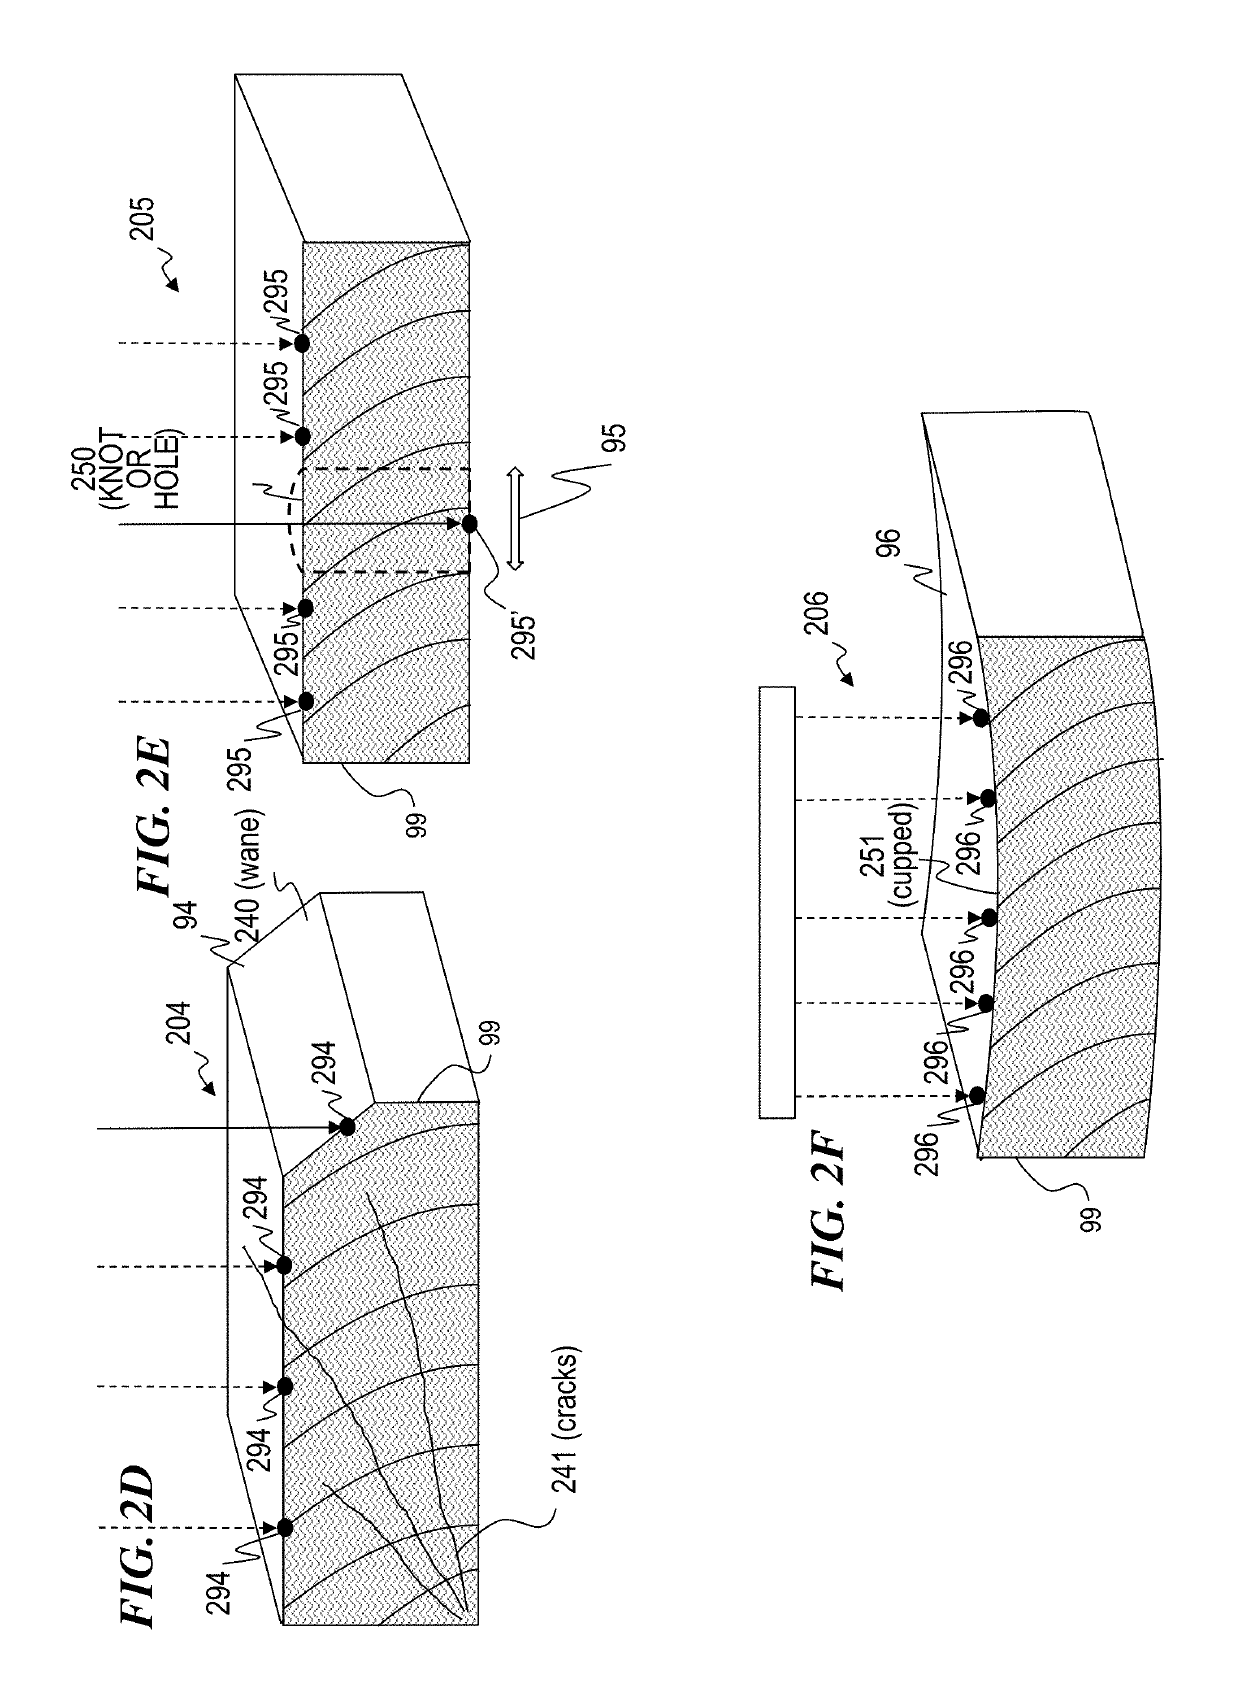 Automated system and method for lumber picking